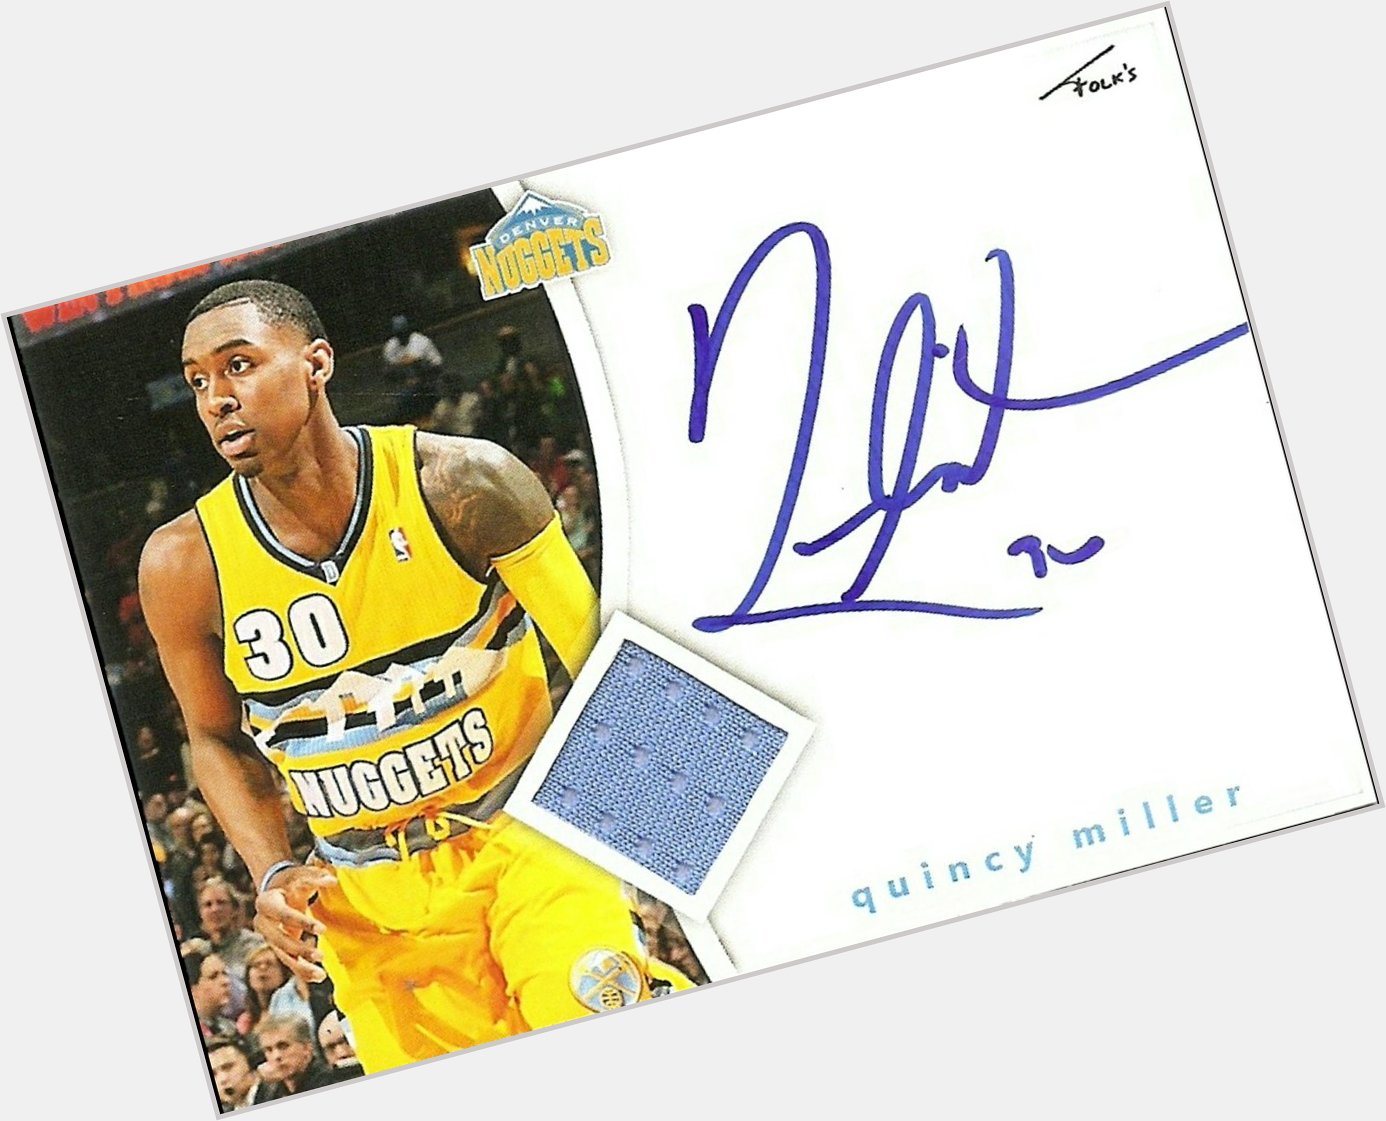 Happy Birthday to Quincy Miller who turns 25 today. Enjoy your day 